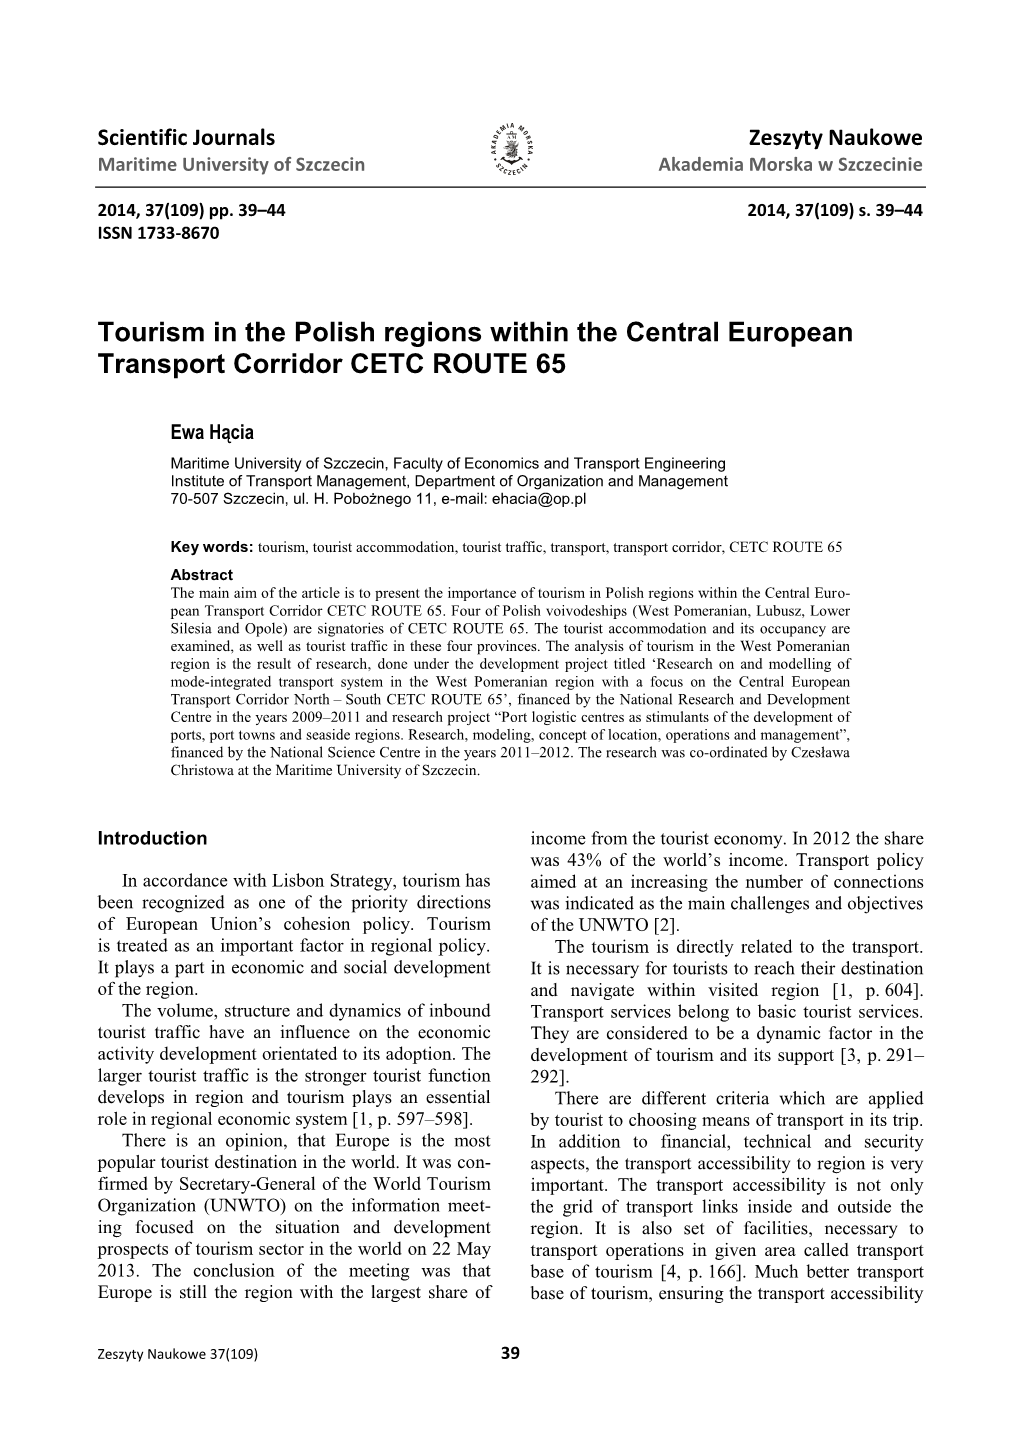 Tourism in the Polish Regions Within the Central European Transport Corridor CETC ROUTE 65